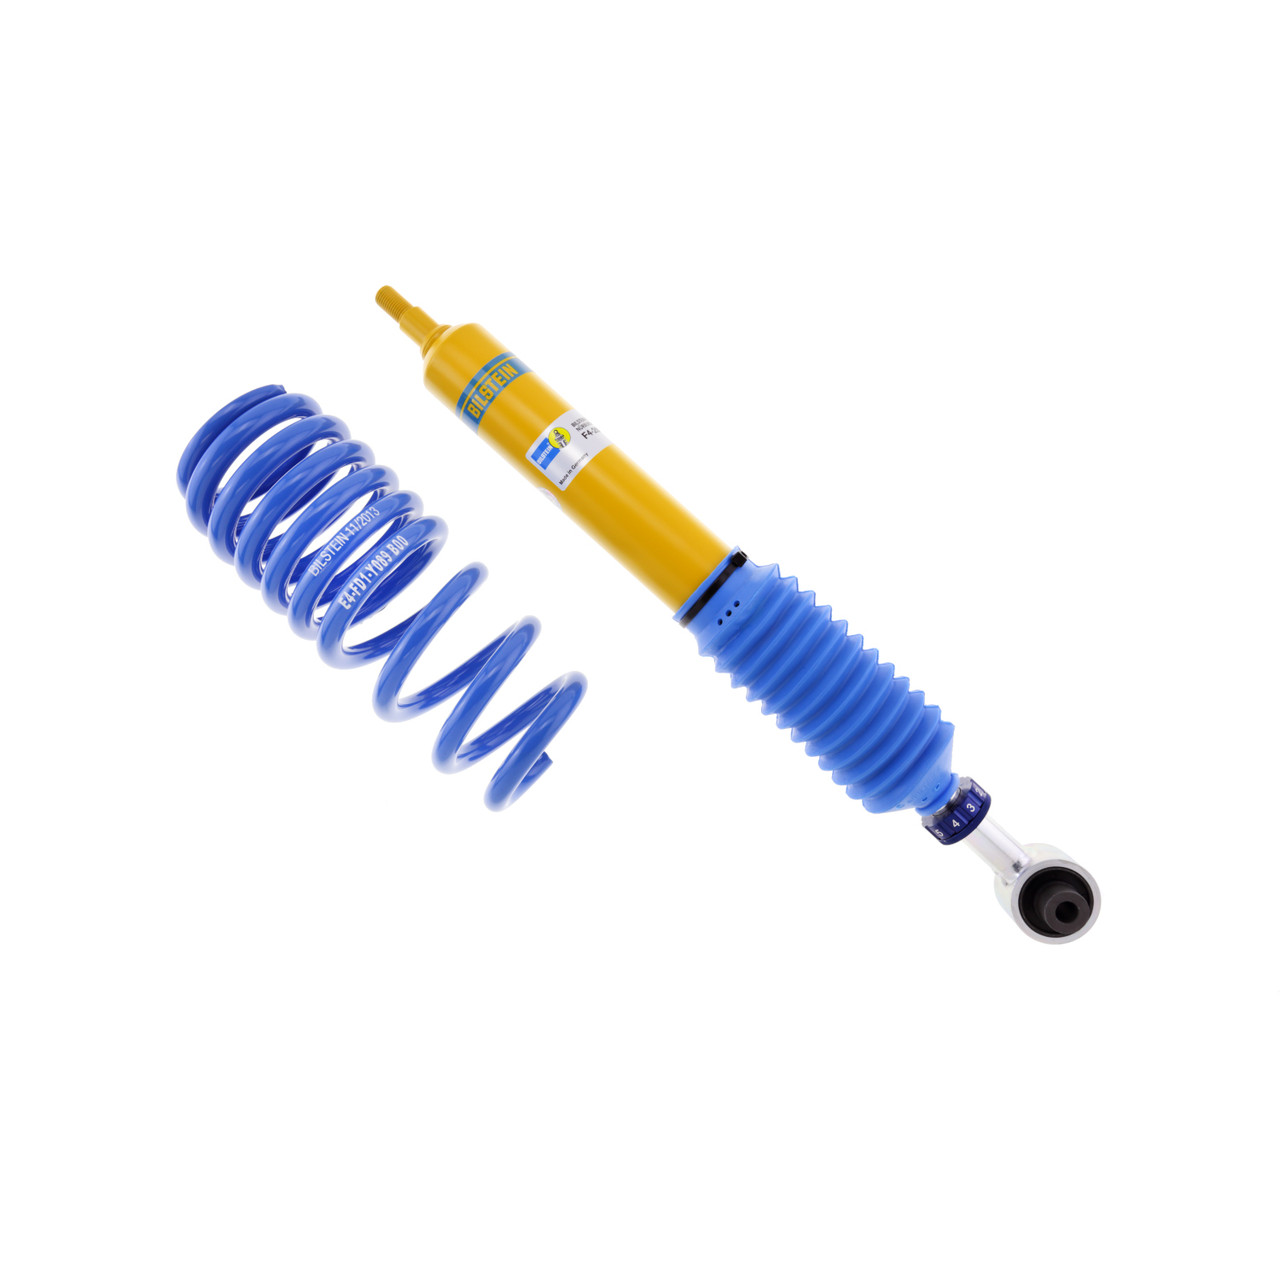 Bilstein B16 PSS10 Coilovers for F80 M3, F82/F83 M4 & F87 M2